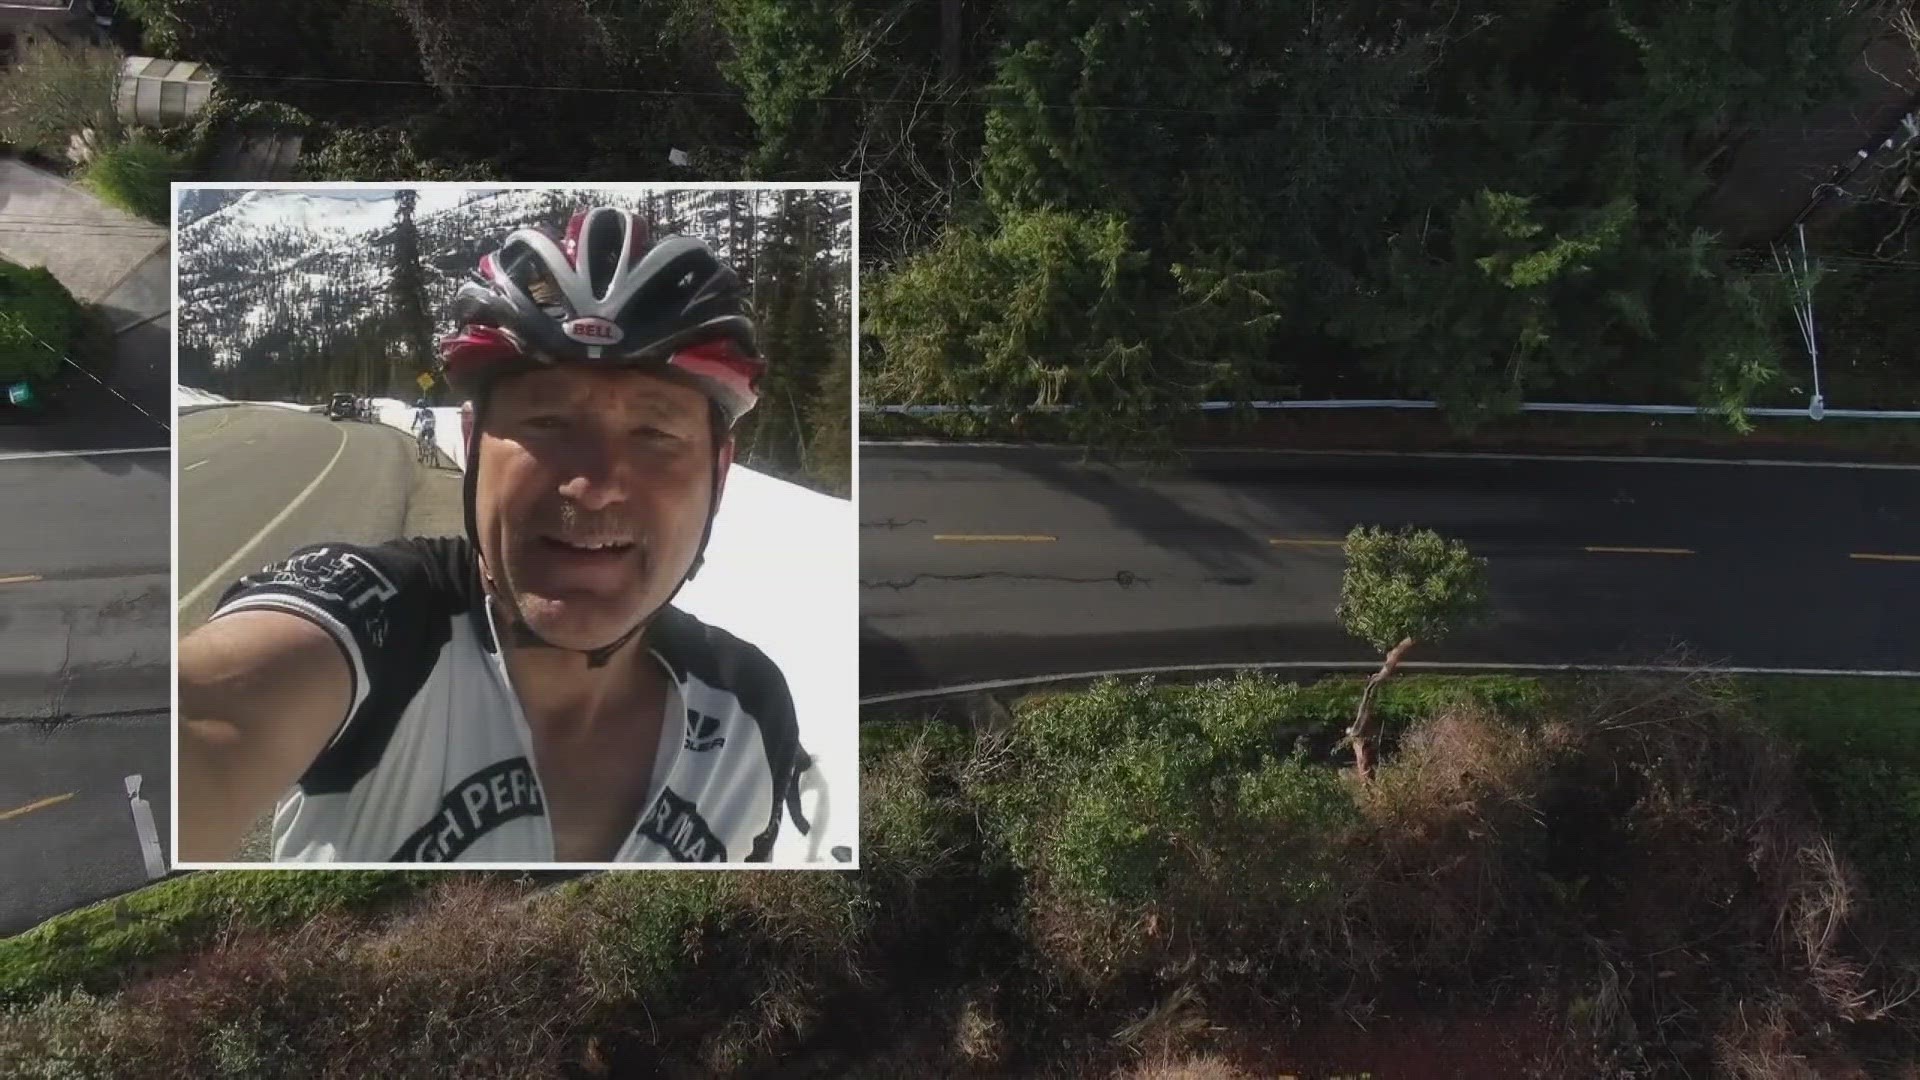 The Cascade Bicycle Club said Steve Hulsman, who was a ride leader for the nonprofit, was a member for over a decade. He was killed while biking on Dec. 21.